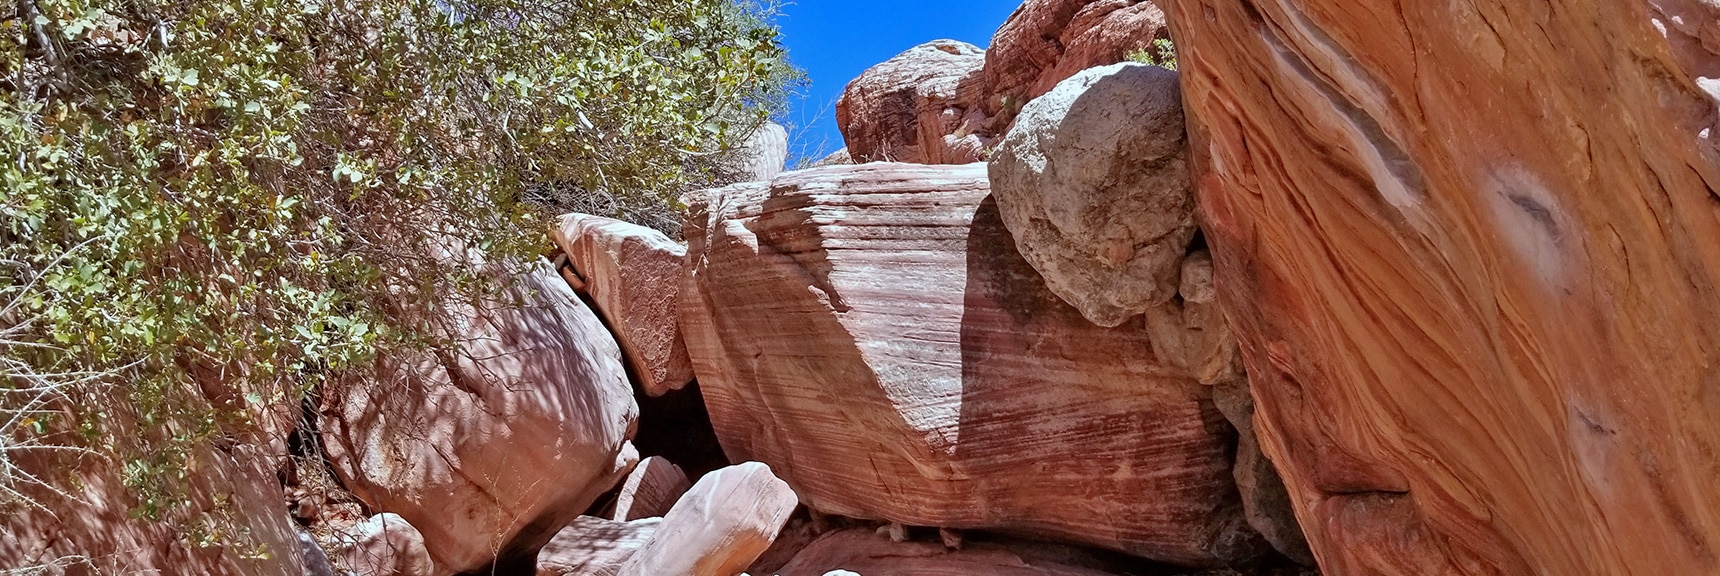 Finding Routes Around Obstacles in Gateway Canyon | Kraft Mountain Loop | Calico Basin, Nevada